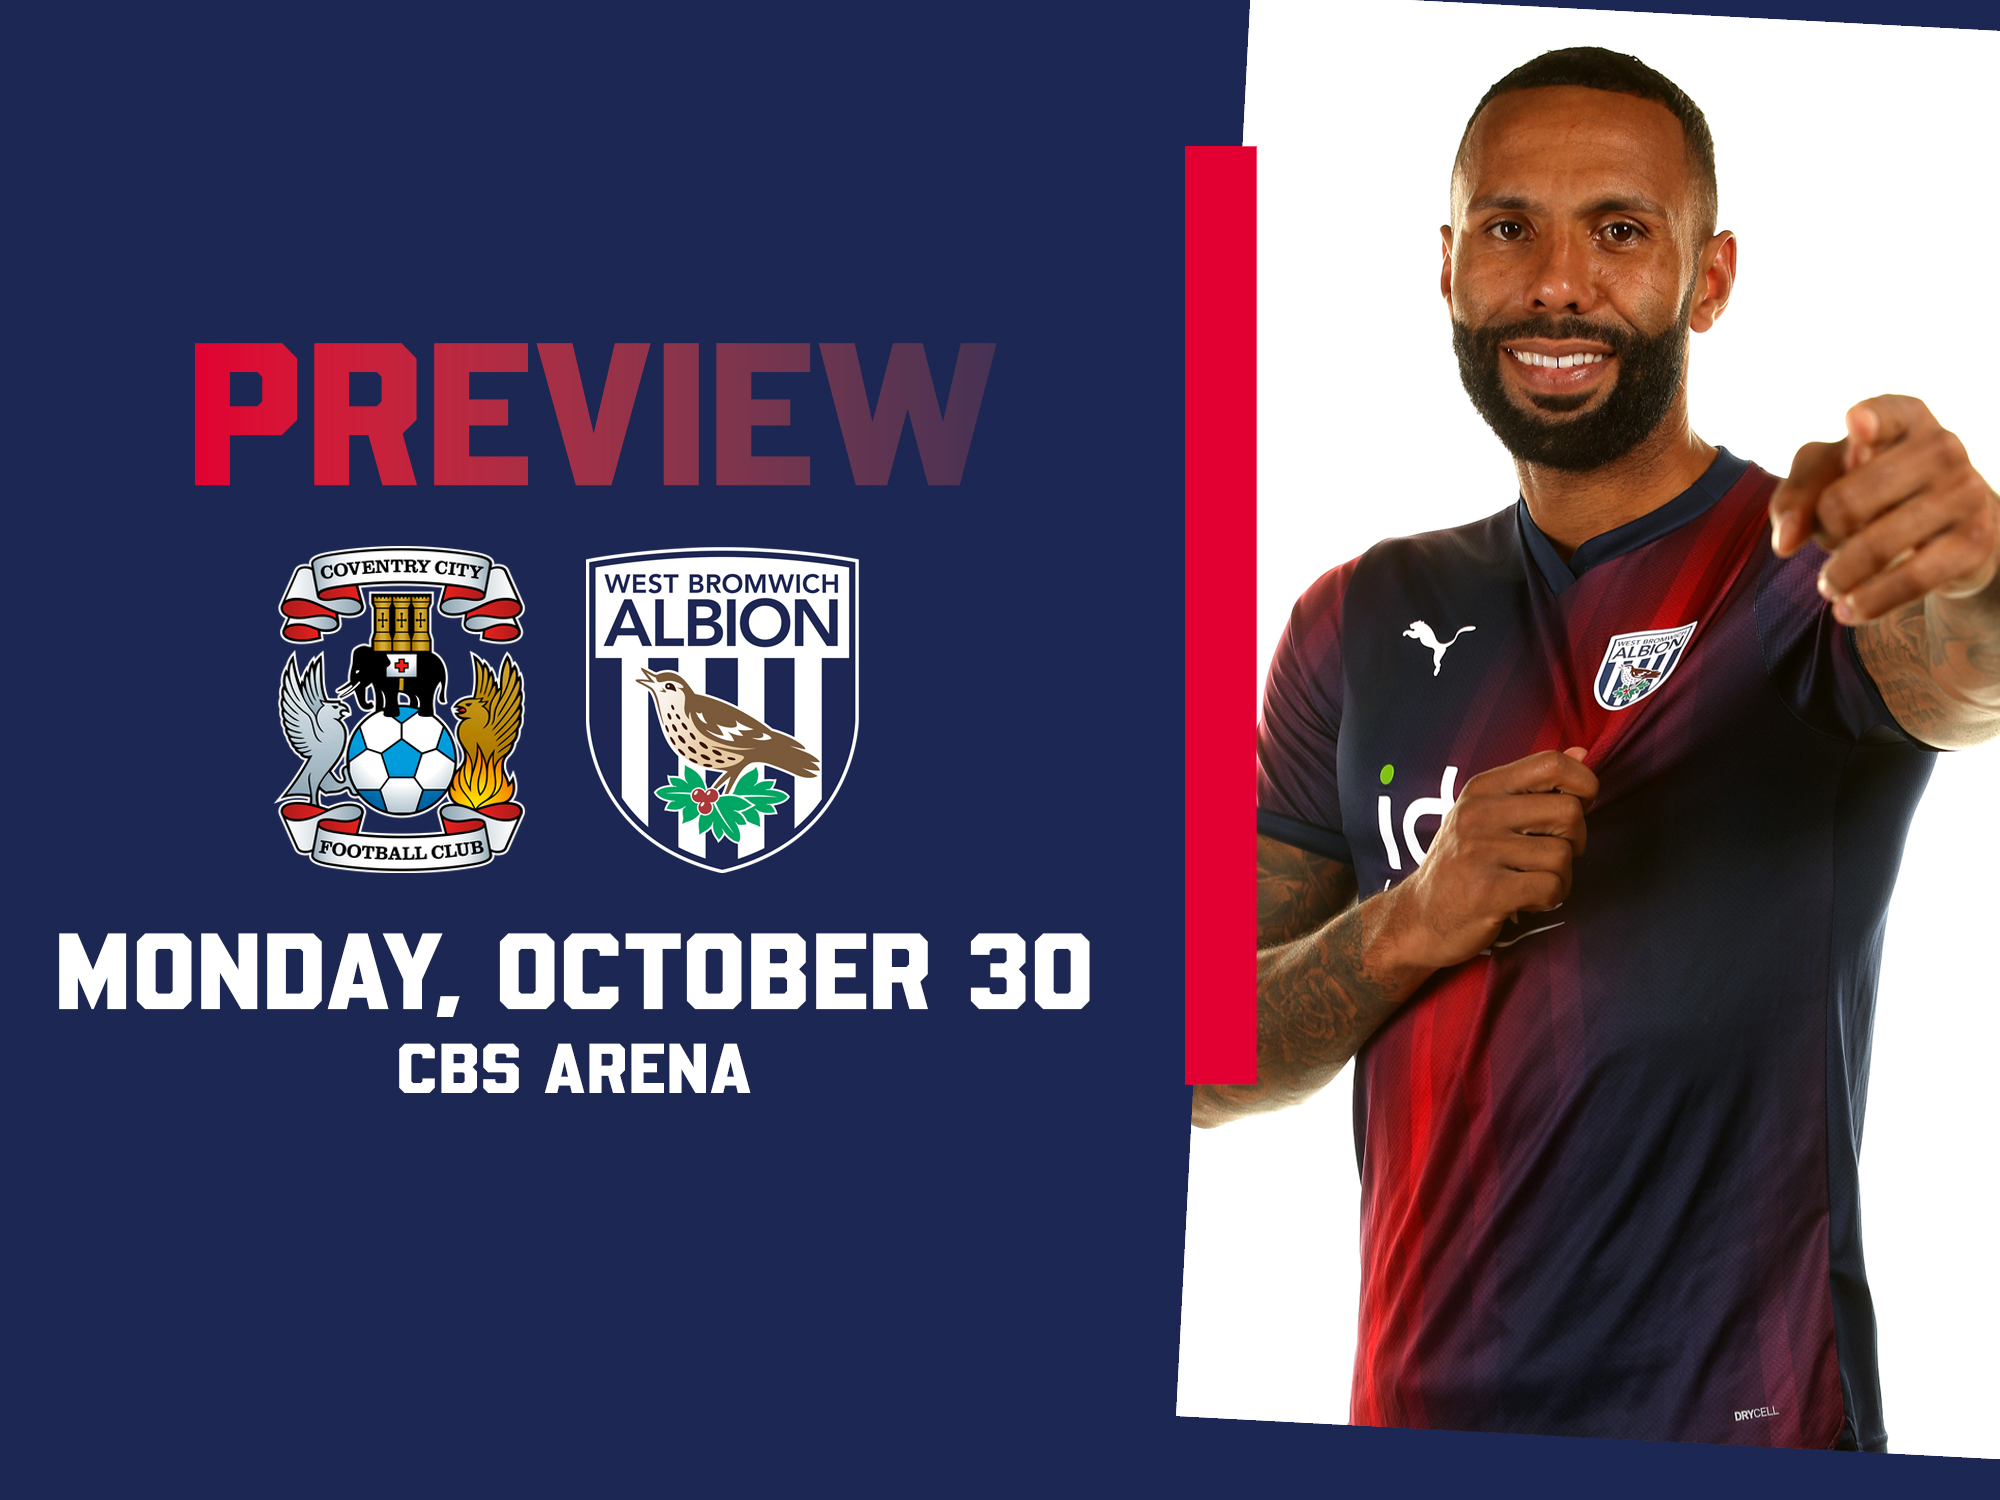 Coventry City & WBA badges next to an image of Kyle Bartley pointing at the camera wearing the navy blue and red away shirt